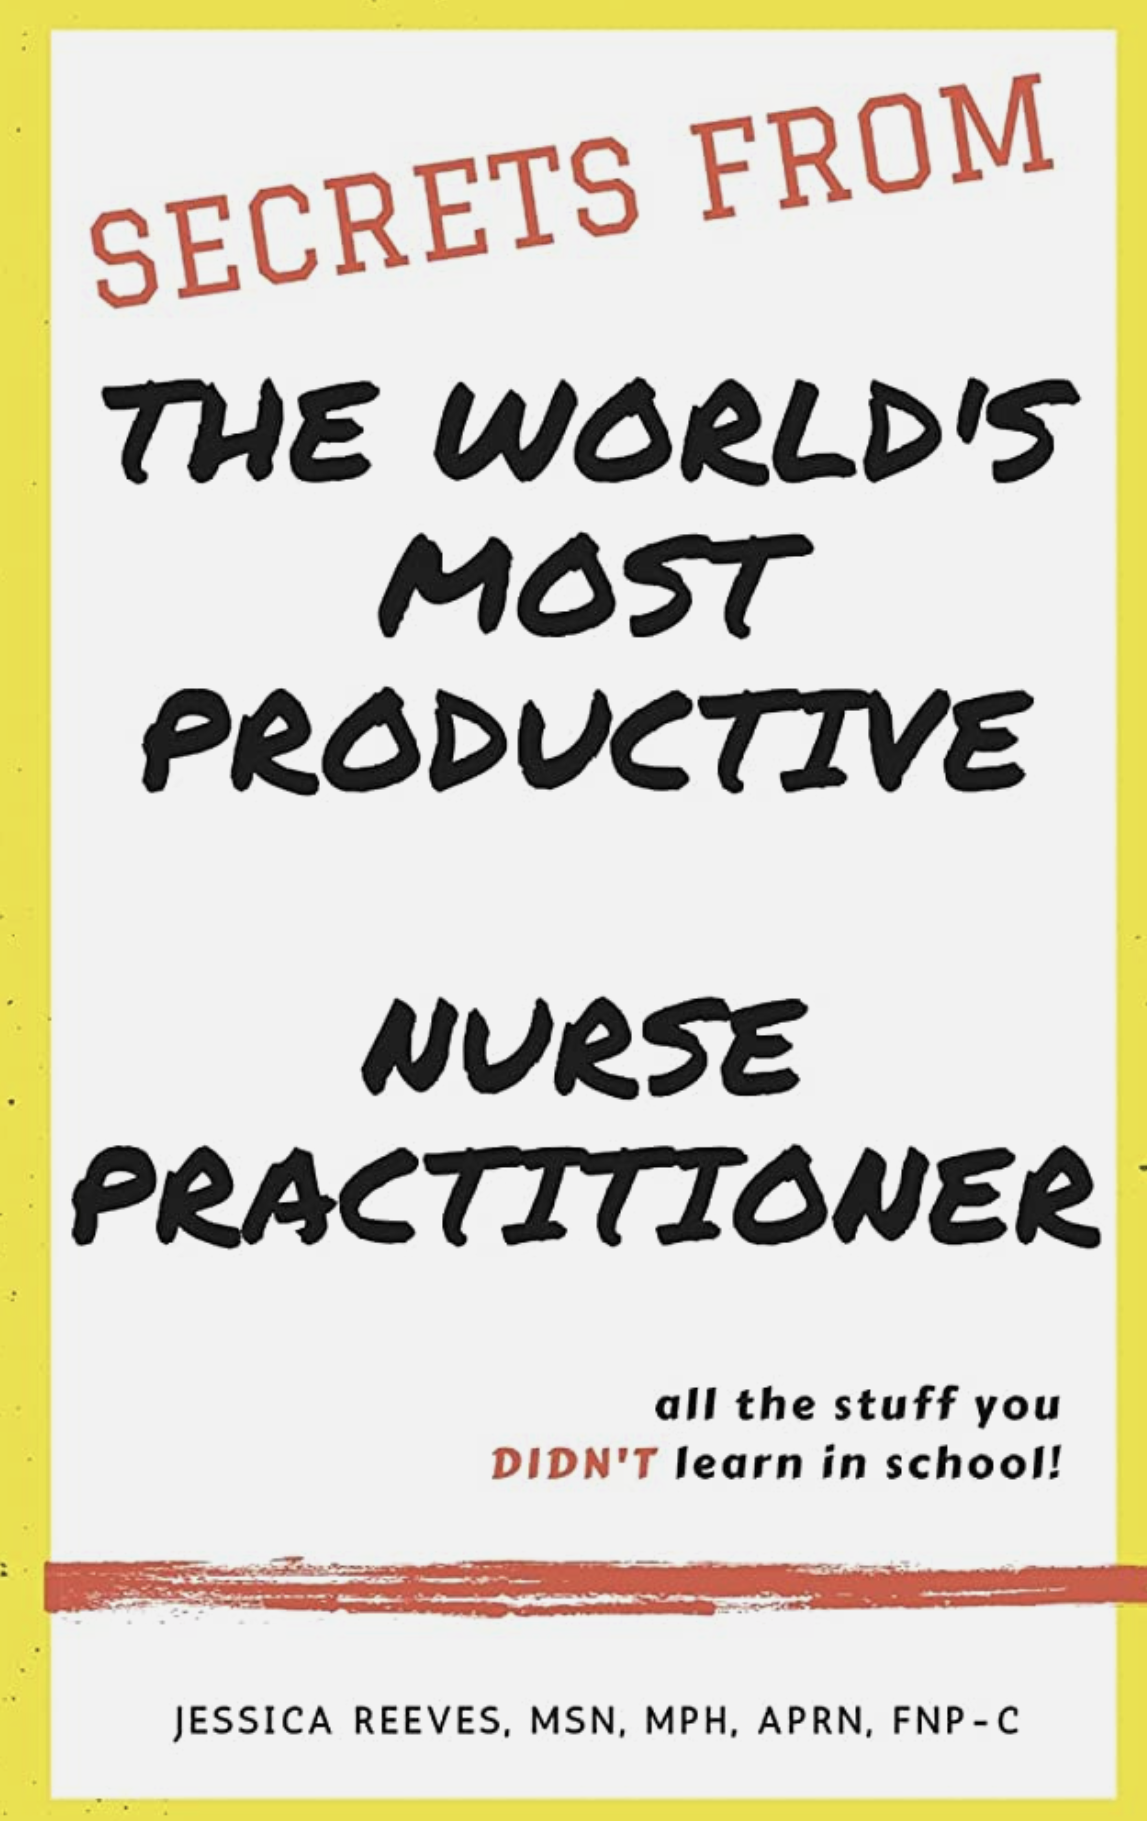 Secrets from the World's Most Productive Nurse Practitioner book cover